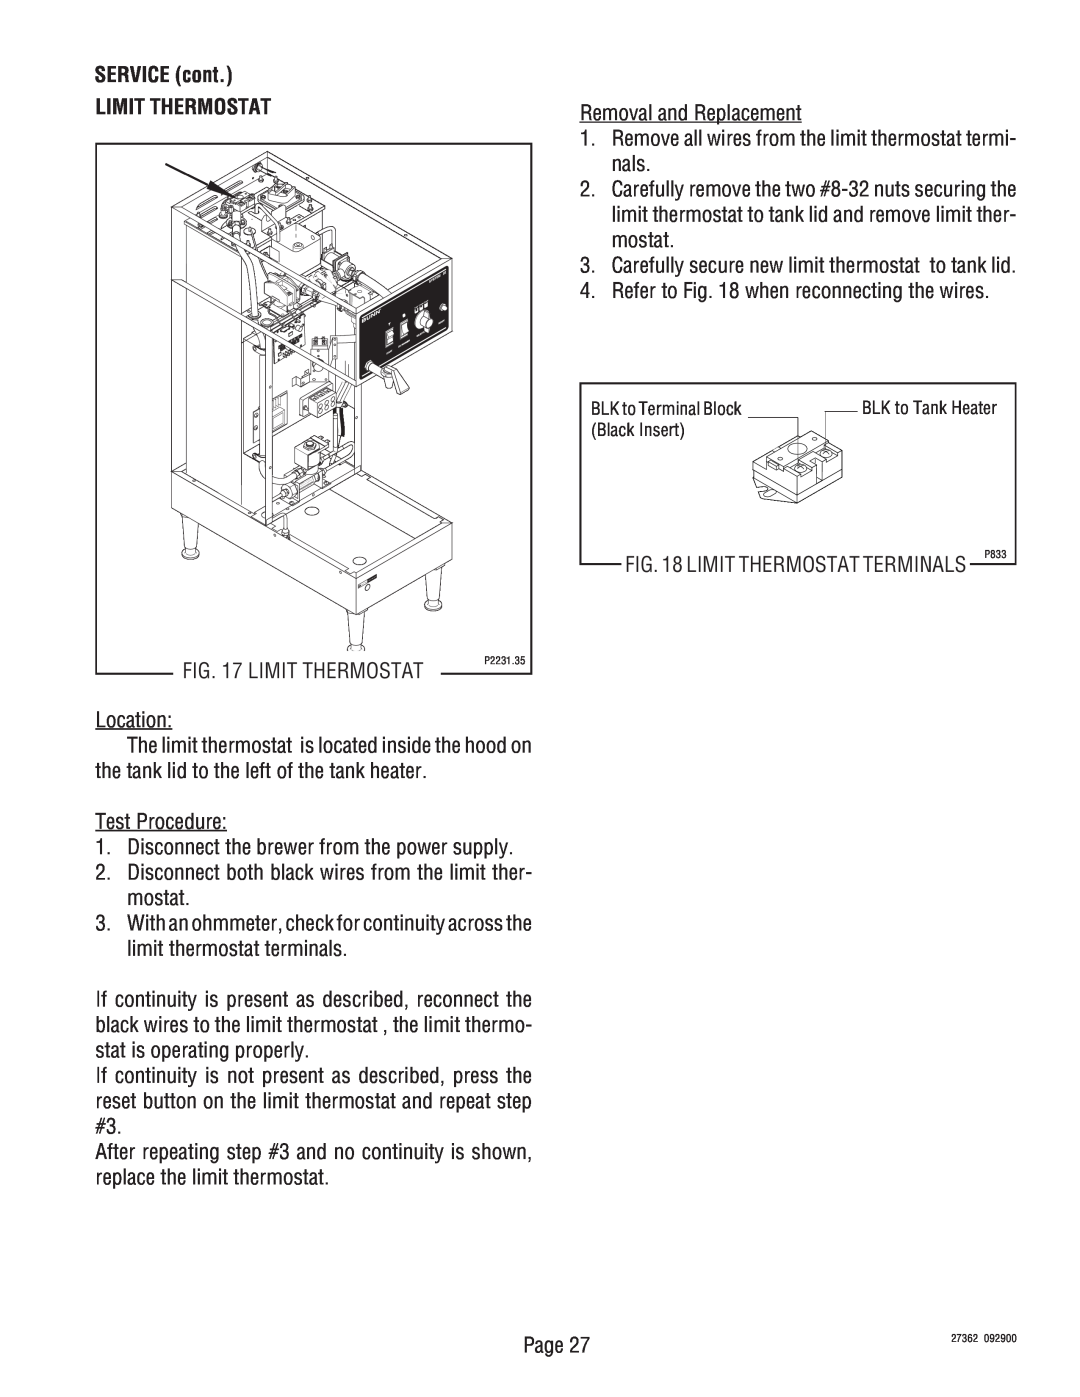 Bunn System III manual SERVICE cont LIMIT THERMOSTAT 